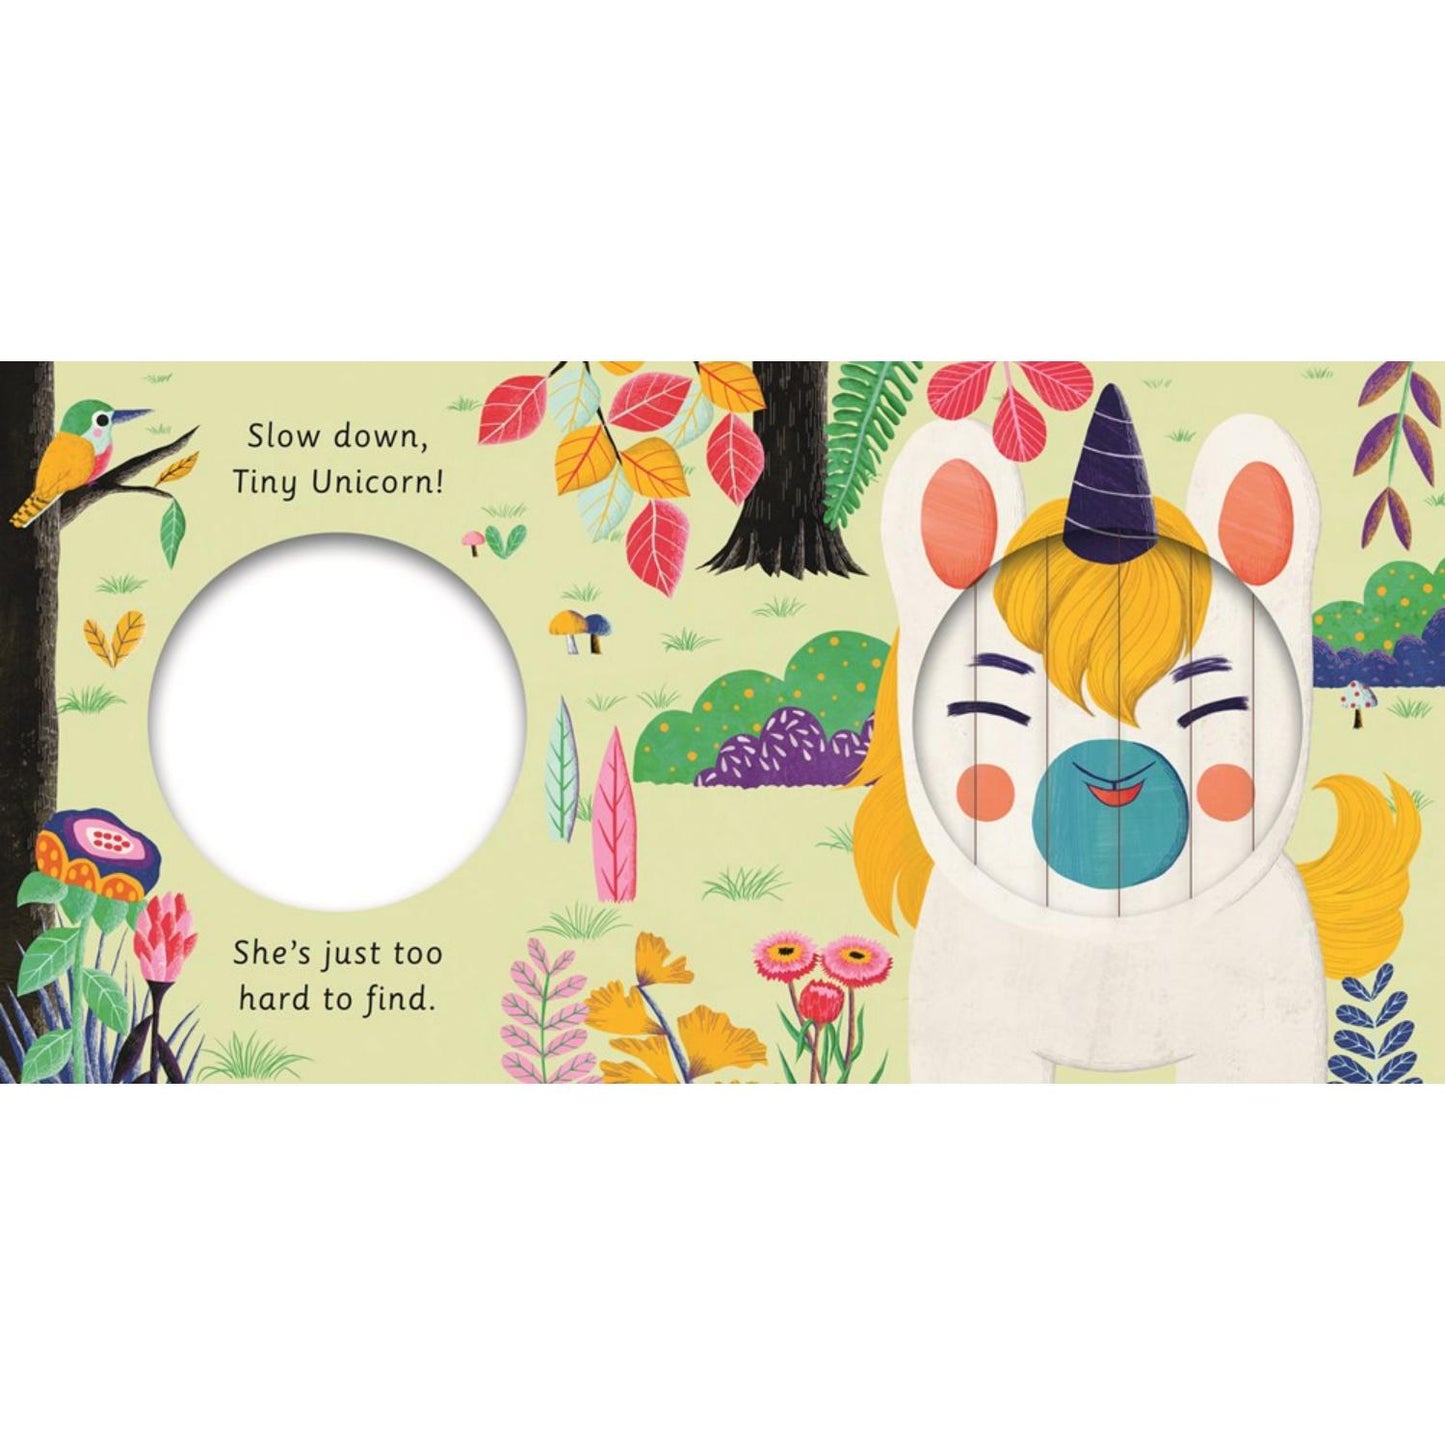 Slow Down, Tiny Unicorn!  - Little Faces Series | Interactive Board Book for Babies & Toddlers